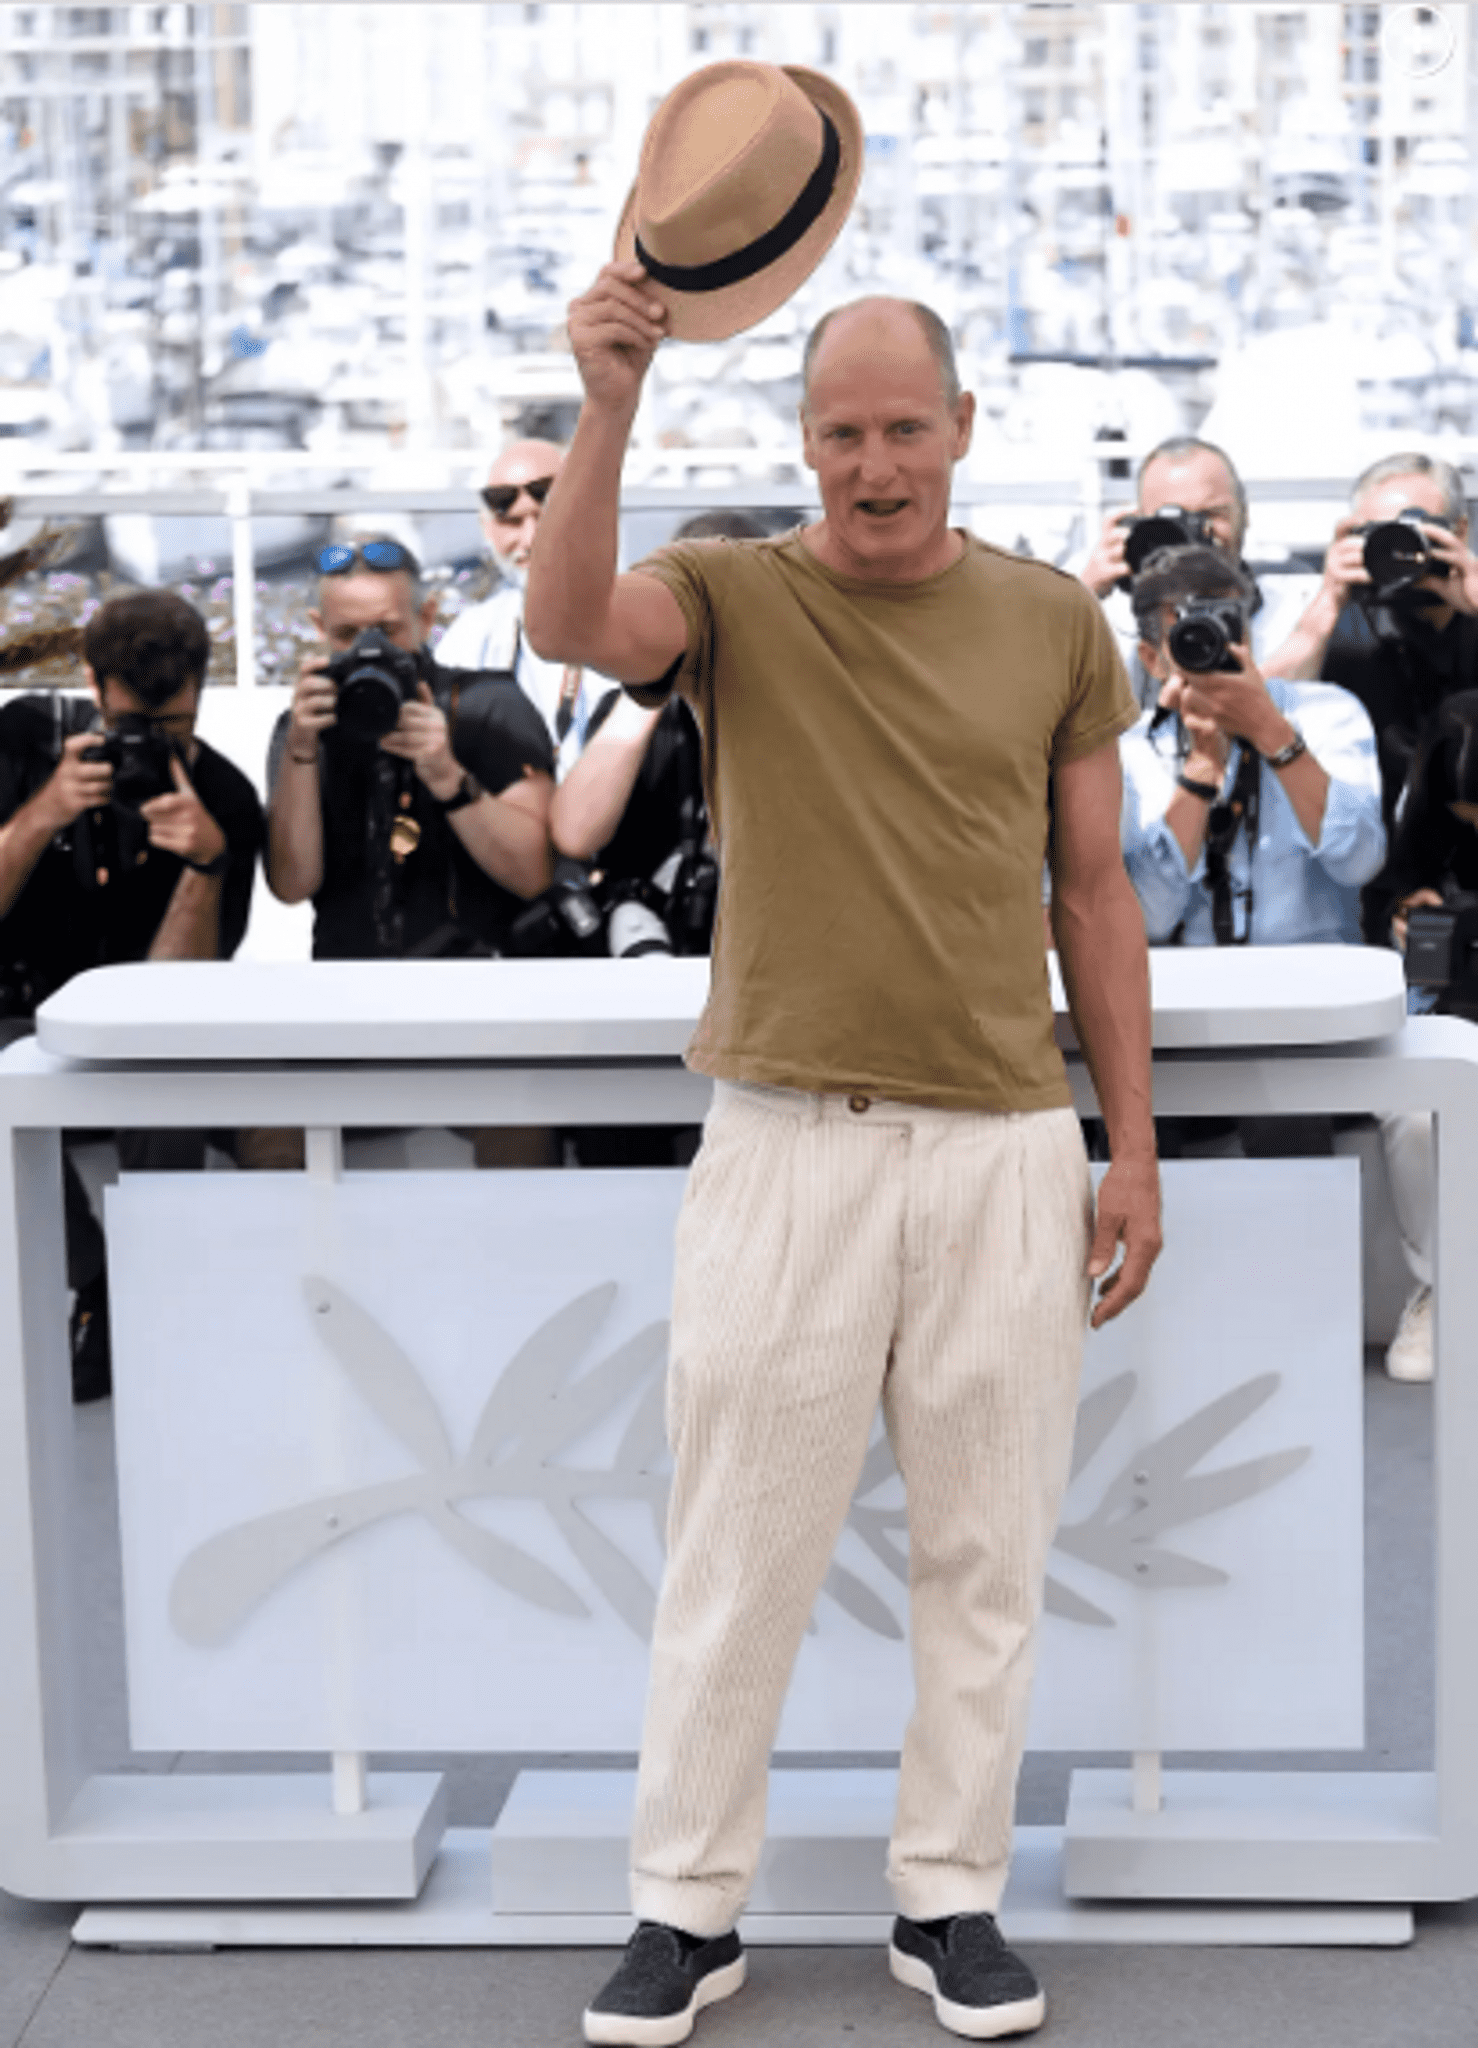 woody-harrelsons-film-gets-an-eight-minute-standing-ovation-at-cannes